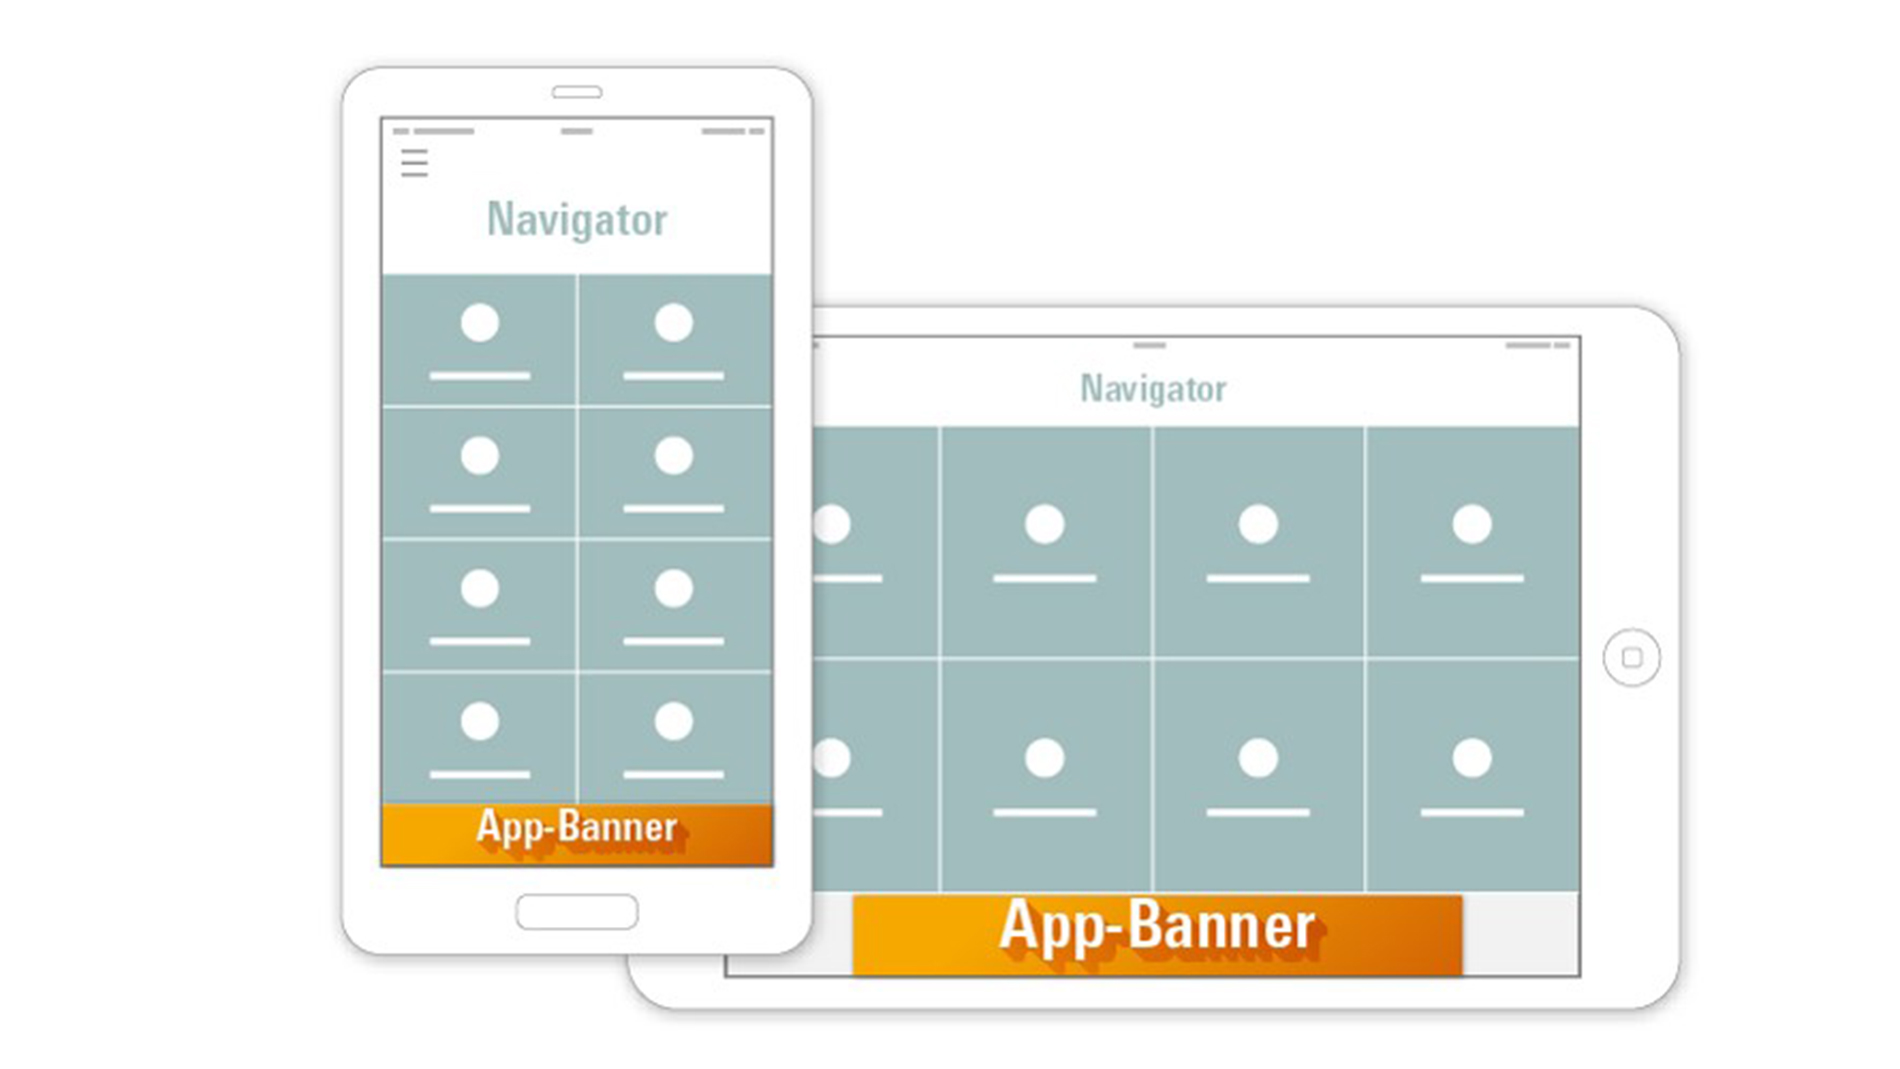 In-app banner ads: Your marketing message on the visitor’s personal device